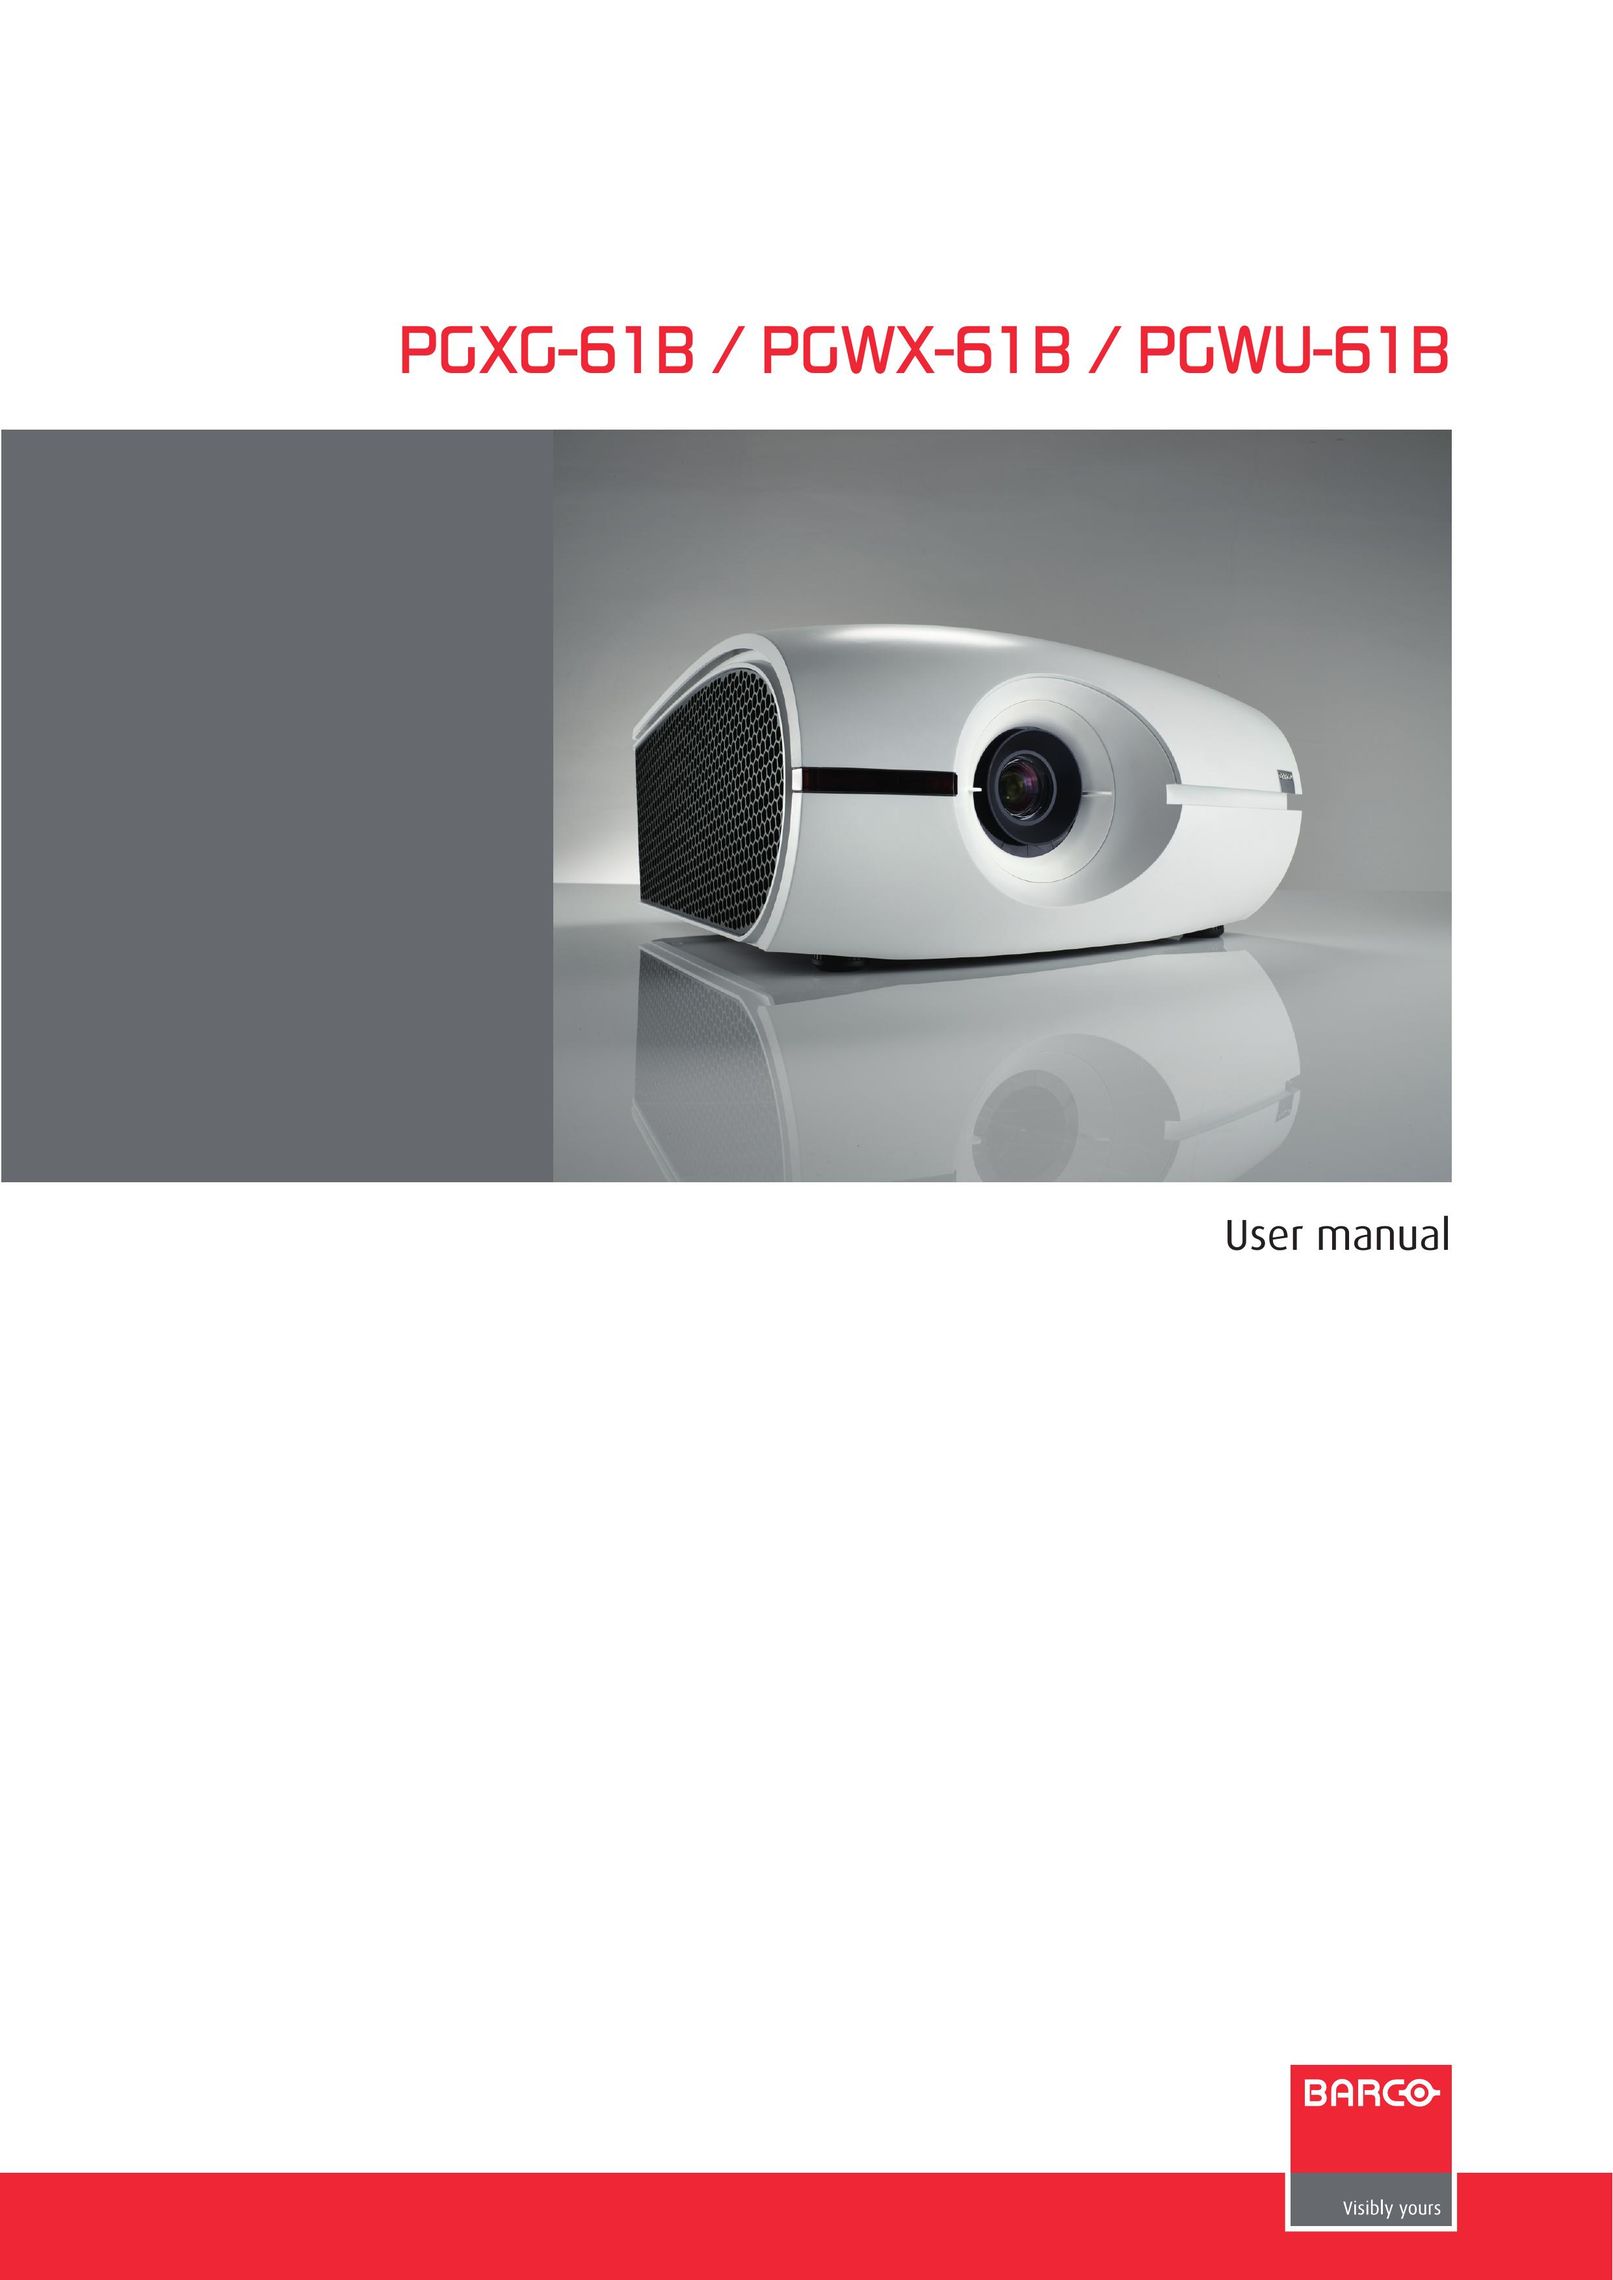 Barco PGWX-61B Projection Television User Manual